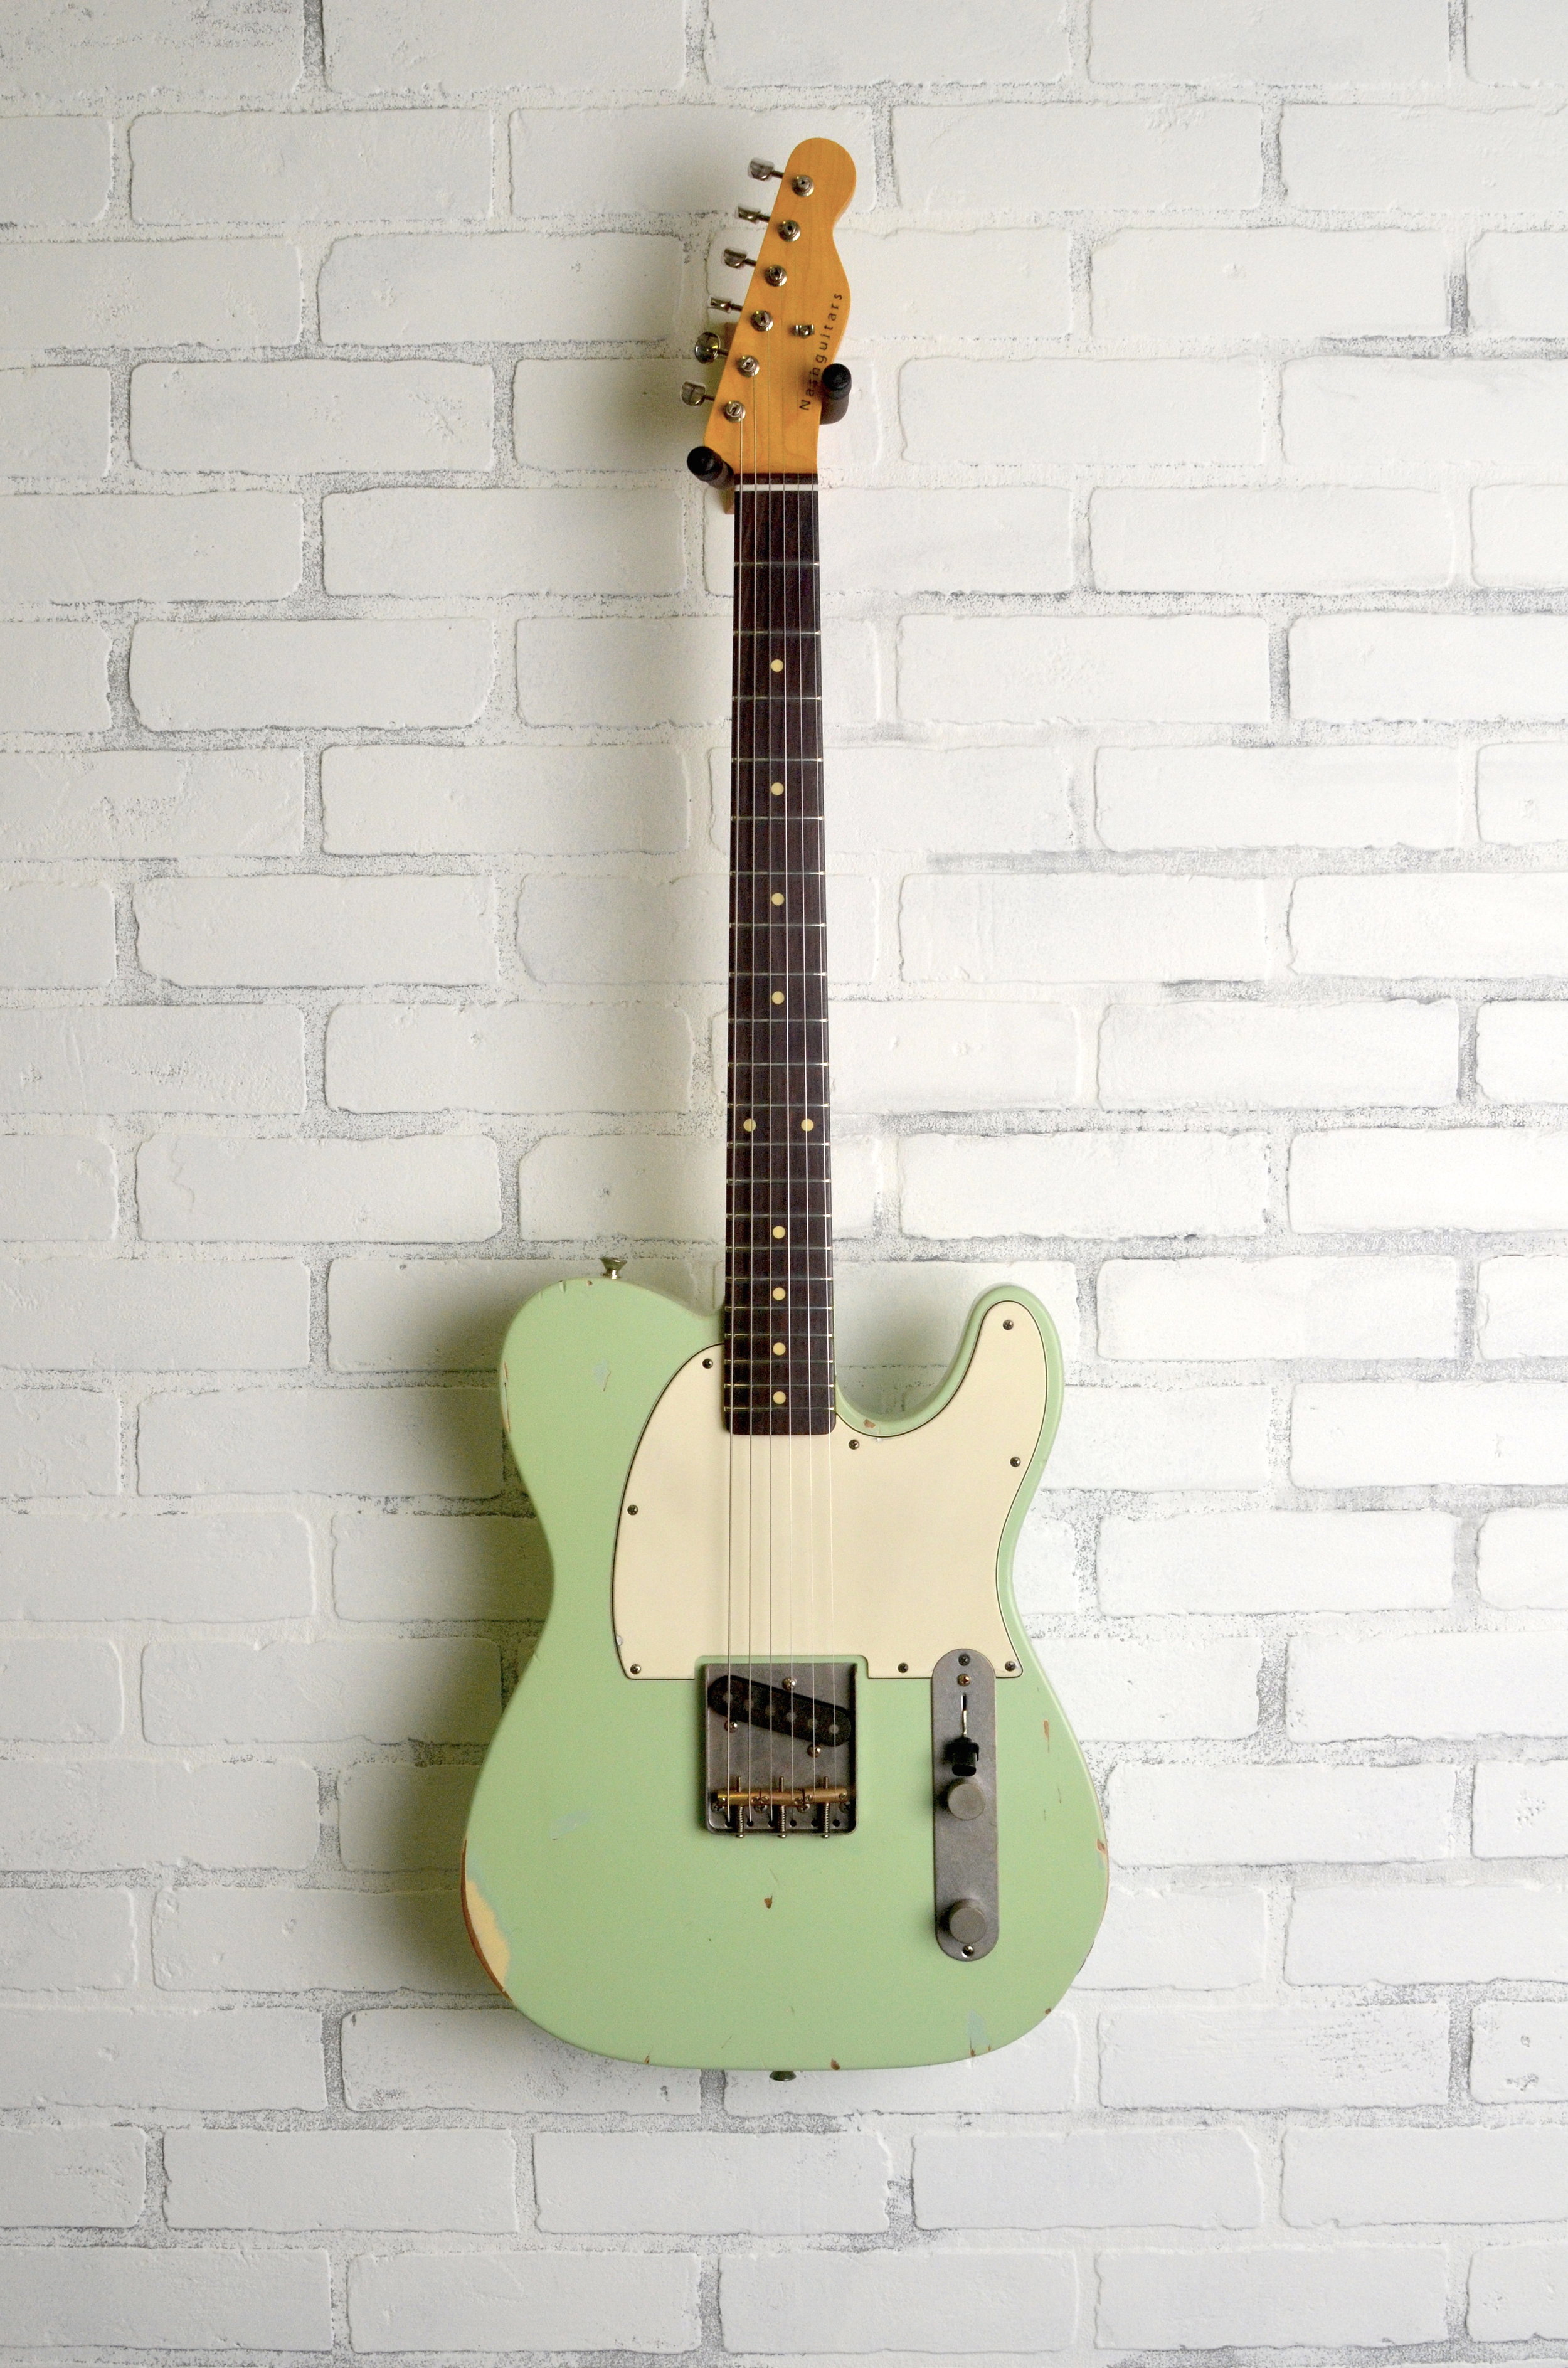  Surf Green  3-ply White Guard  Light Aging 